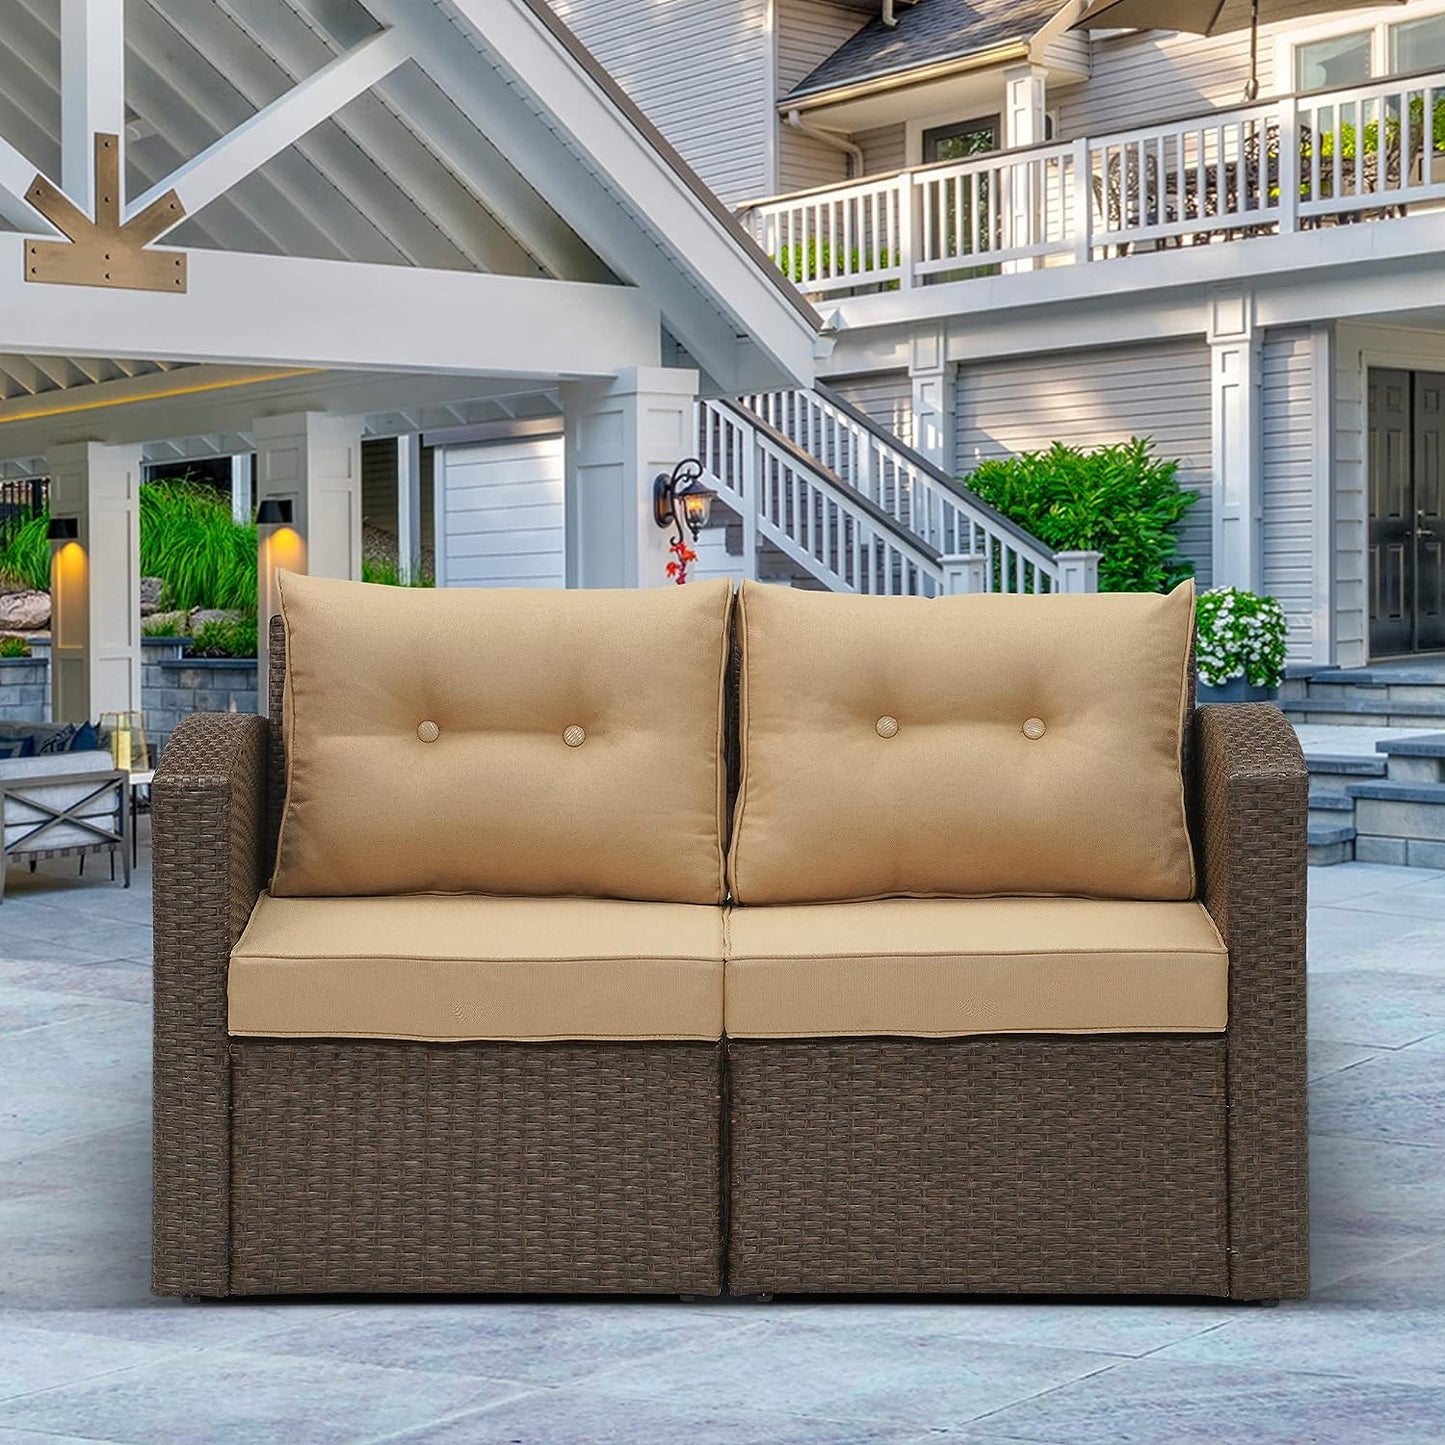 Outdoor Loveseat Patio Furniture Corner Sofa, All-Weather Brown Wicker 2-Piece Rattan Outdoor Sectional Couch Sofa Set with Beige Non-Slip Cushions,Aluminum Frame